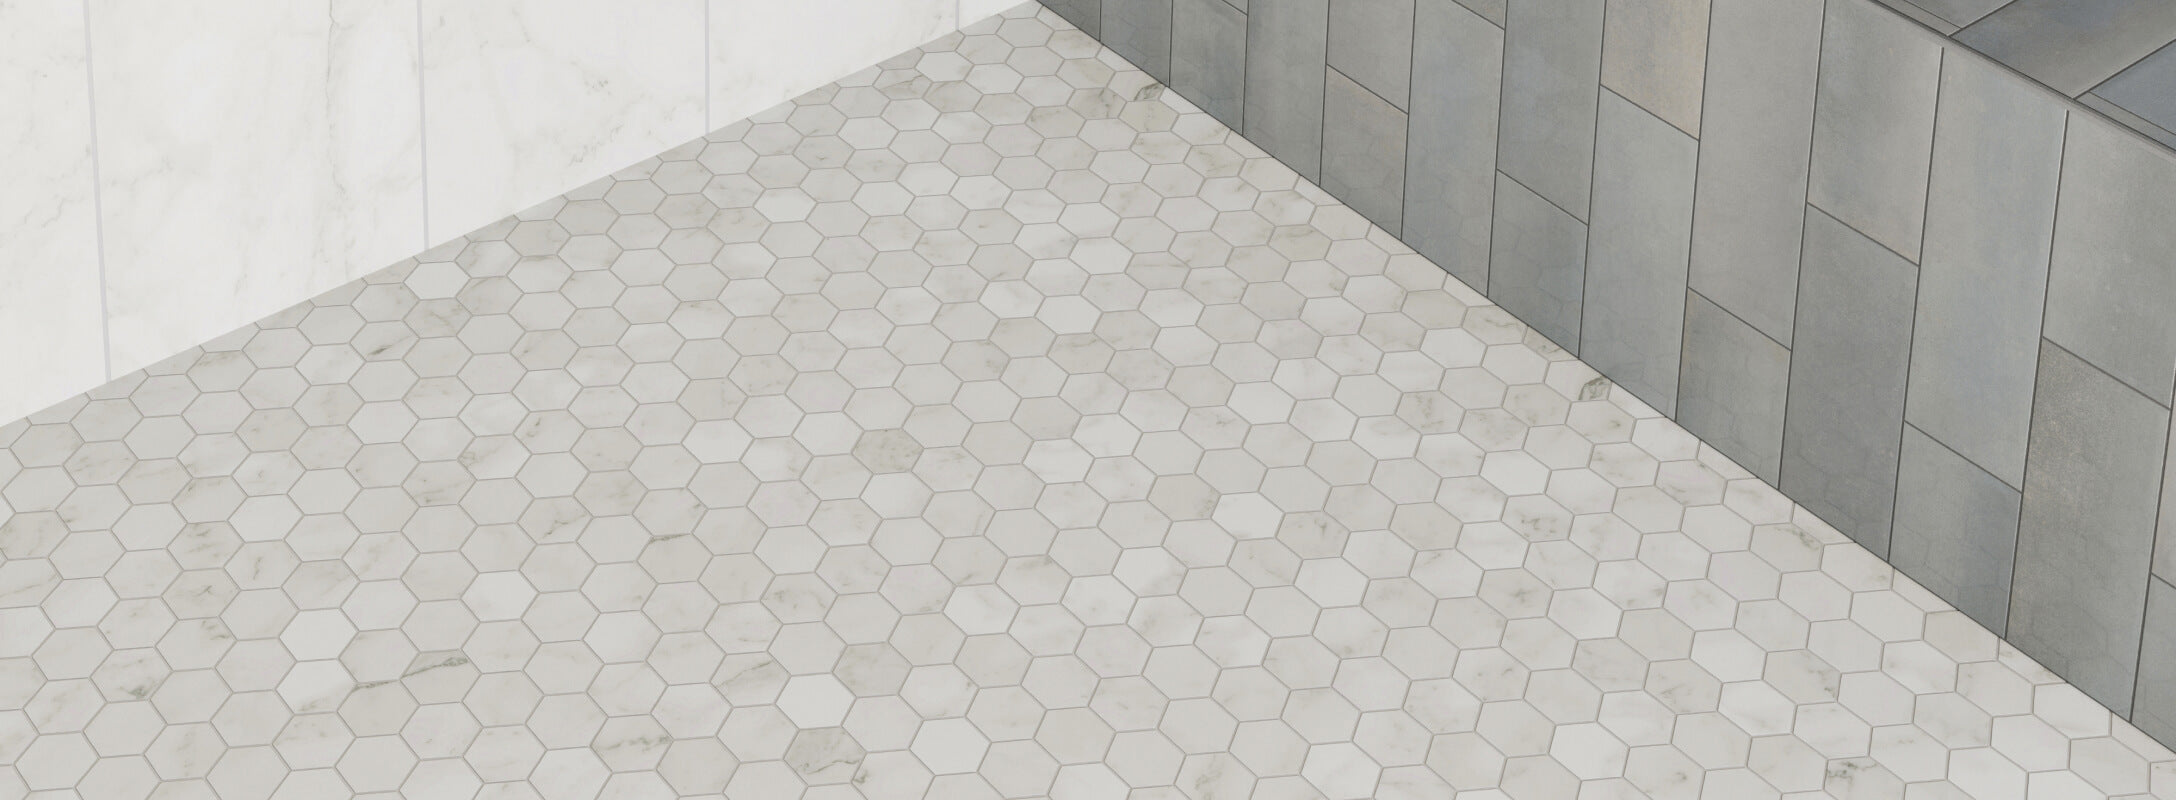 Elegant shower featuring light grey hexagonal mosaic tiles on the floor and varying shades of gray tiles on the walls, creating a cohesive and sophisticated design